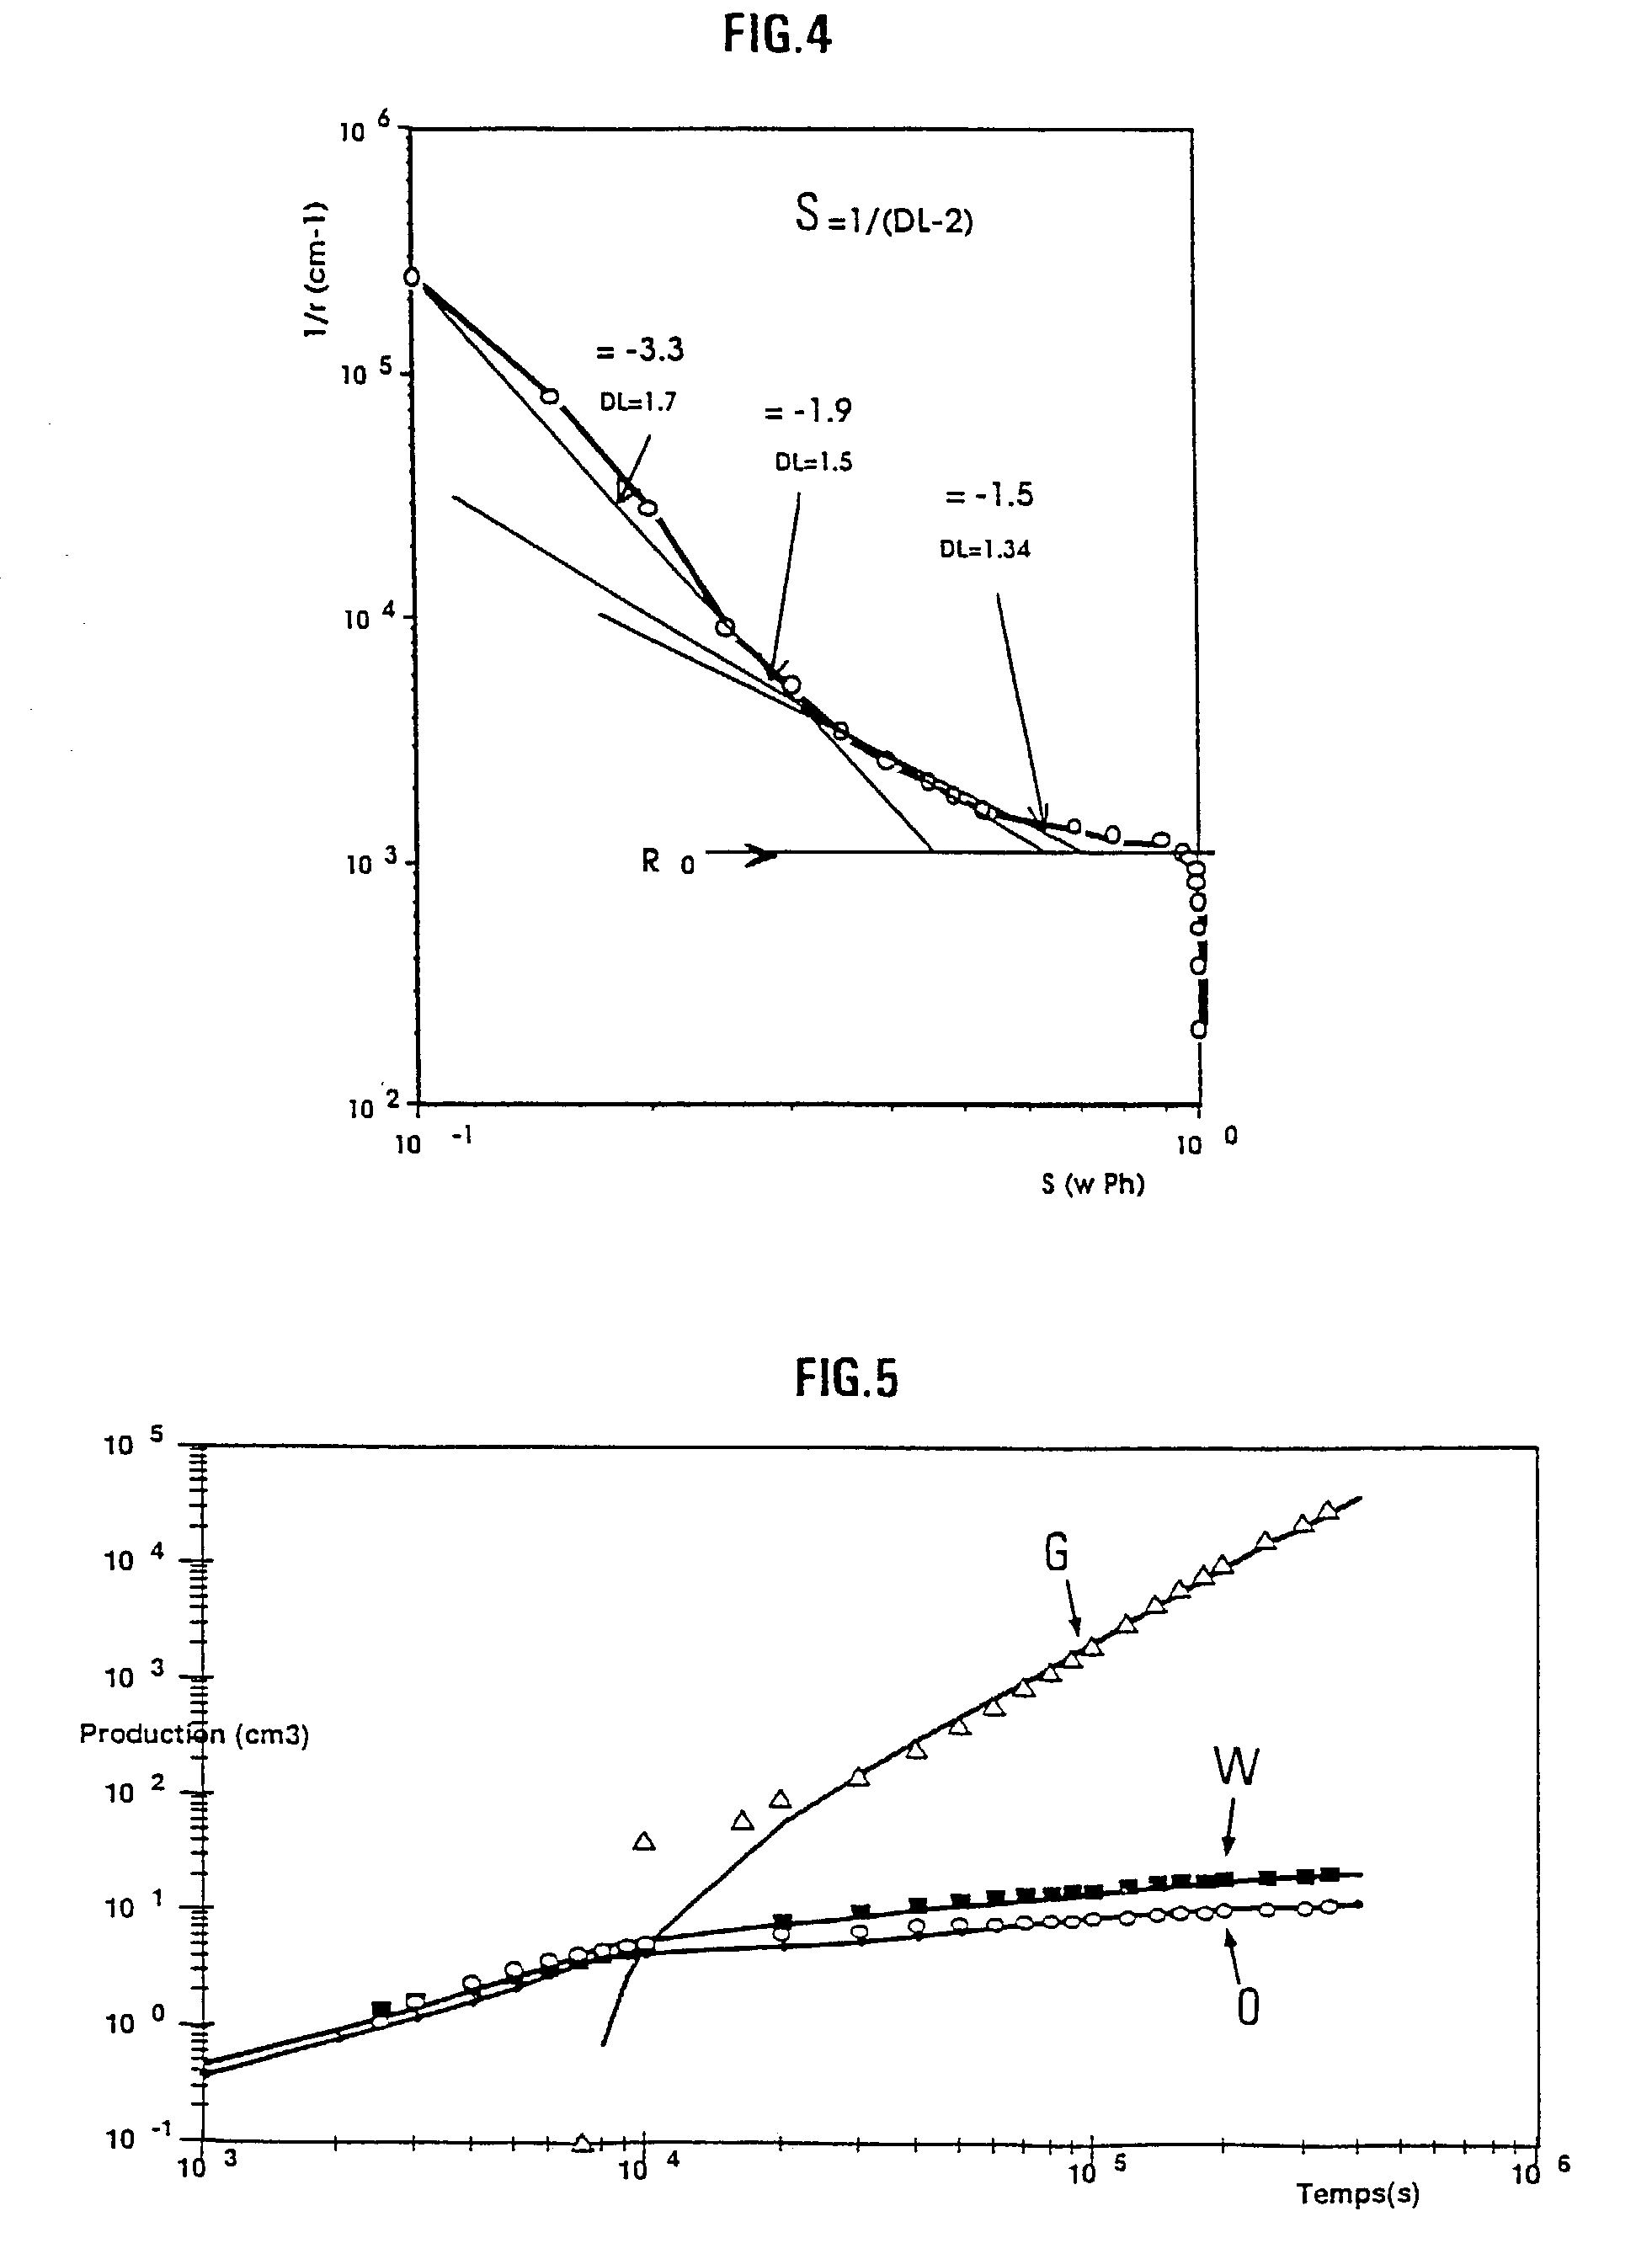 Method for modelling fluid displacements in a porous environment taking into account hysteresis effects